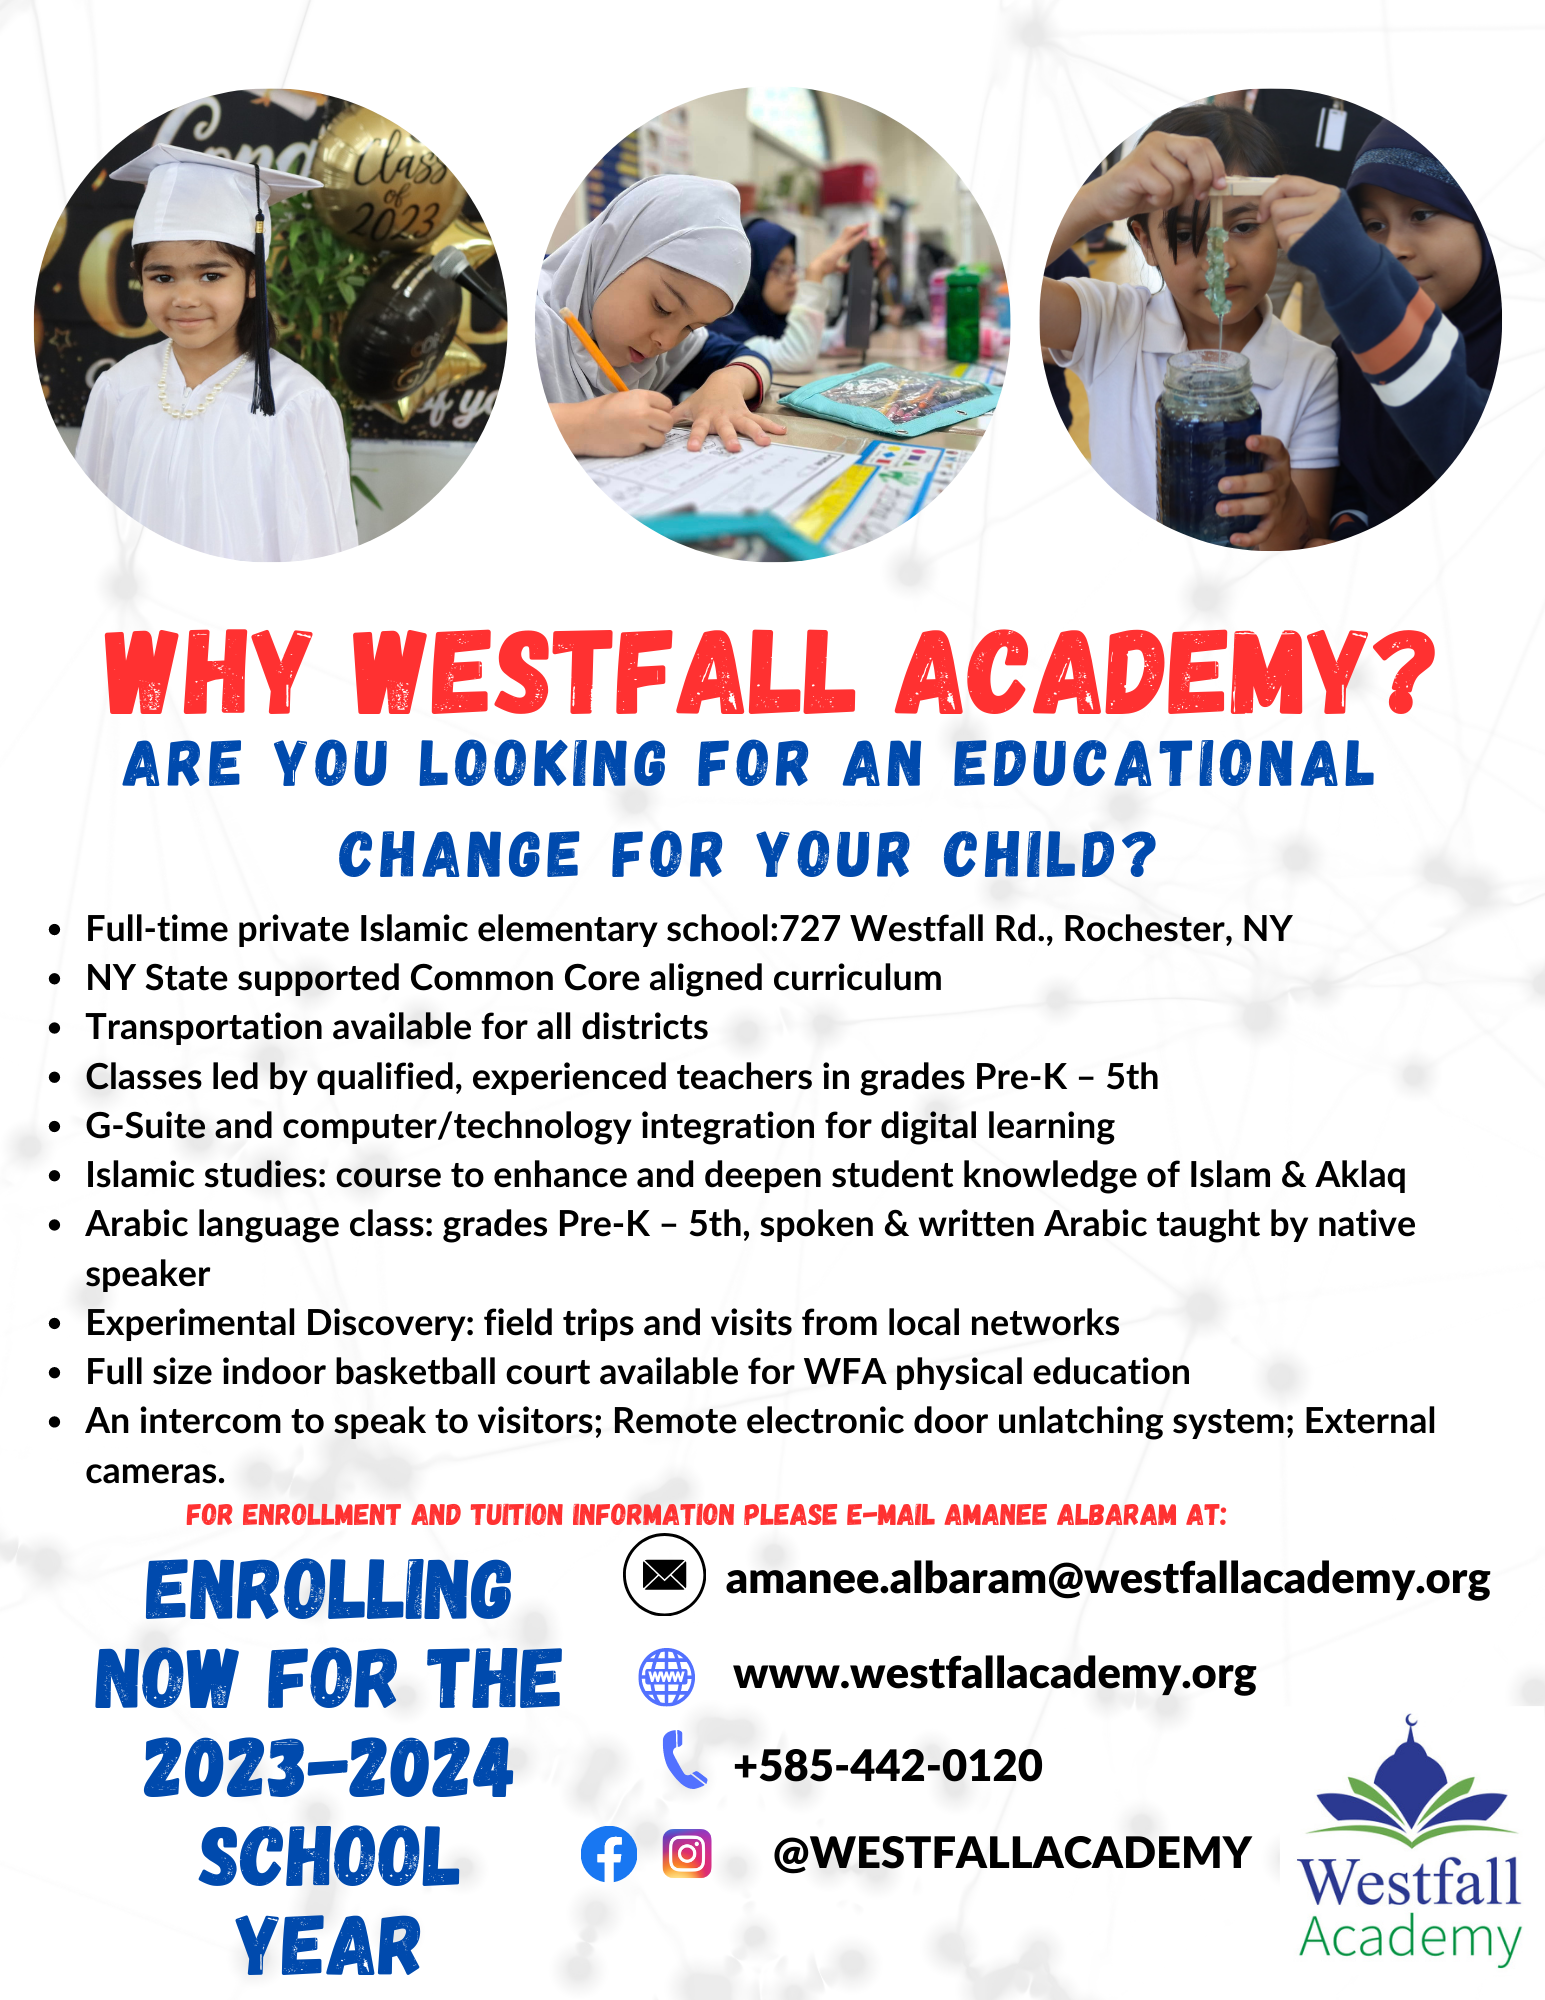 Enroll your child NOW for the new academic school year 2024-2025. Seats are limited.